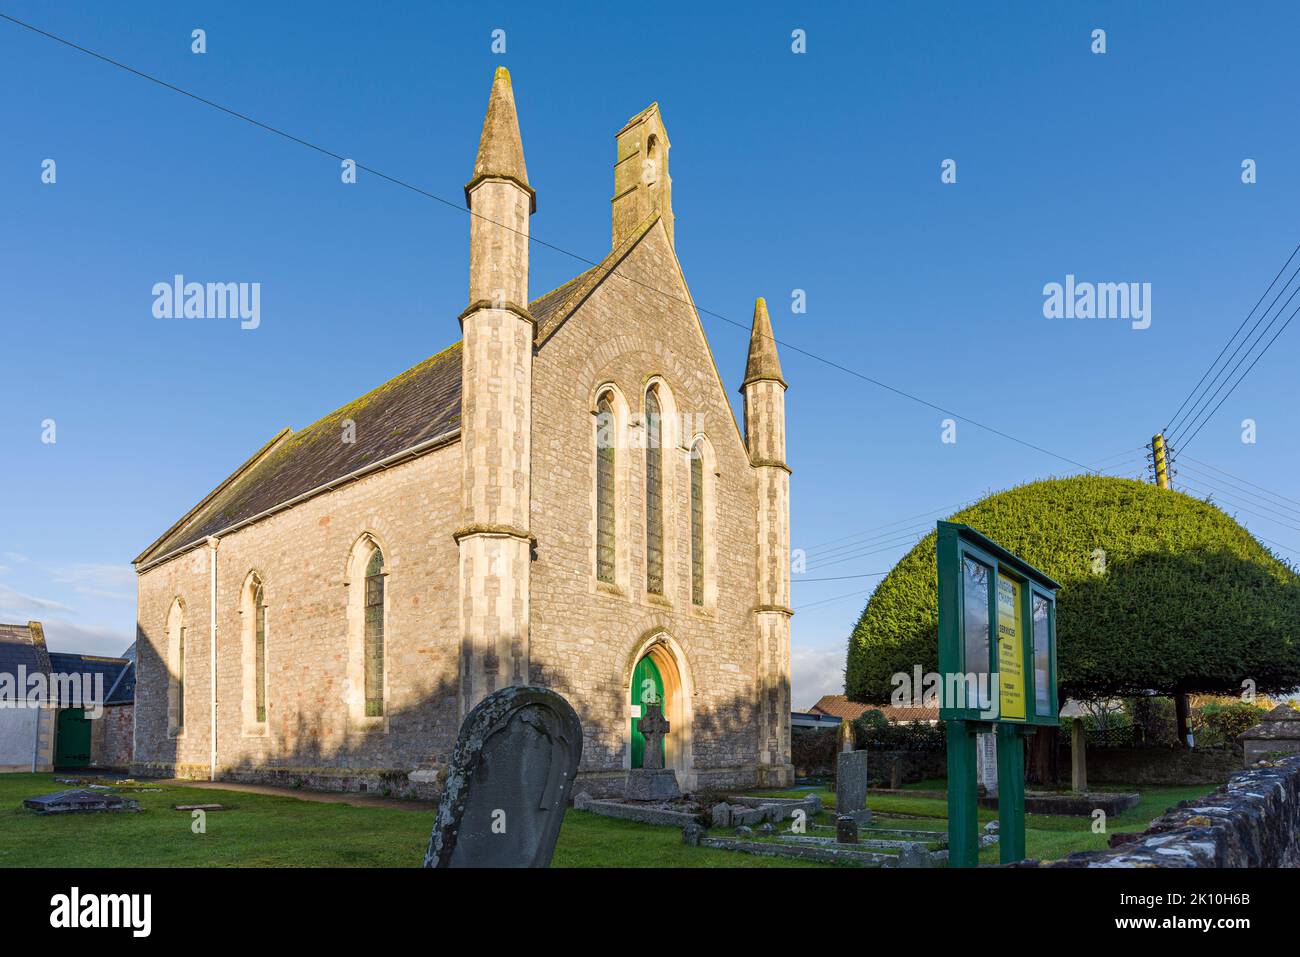 The 19th century Chapel in the village of Langford, home of the Langford Evangelical Church, North Somerset, England. Stock Photo